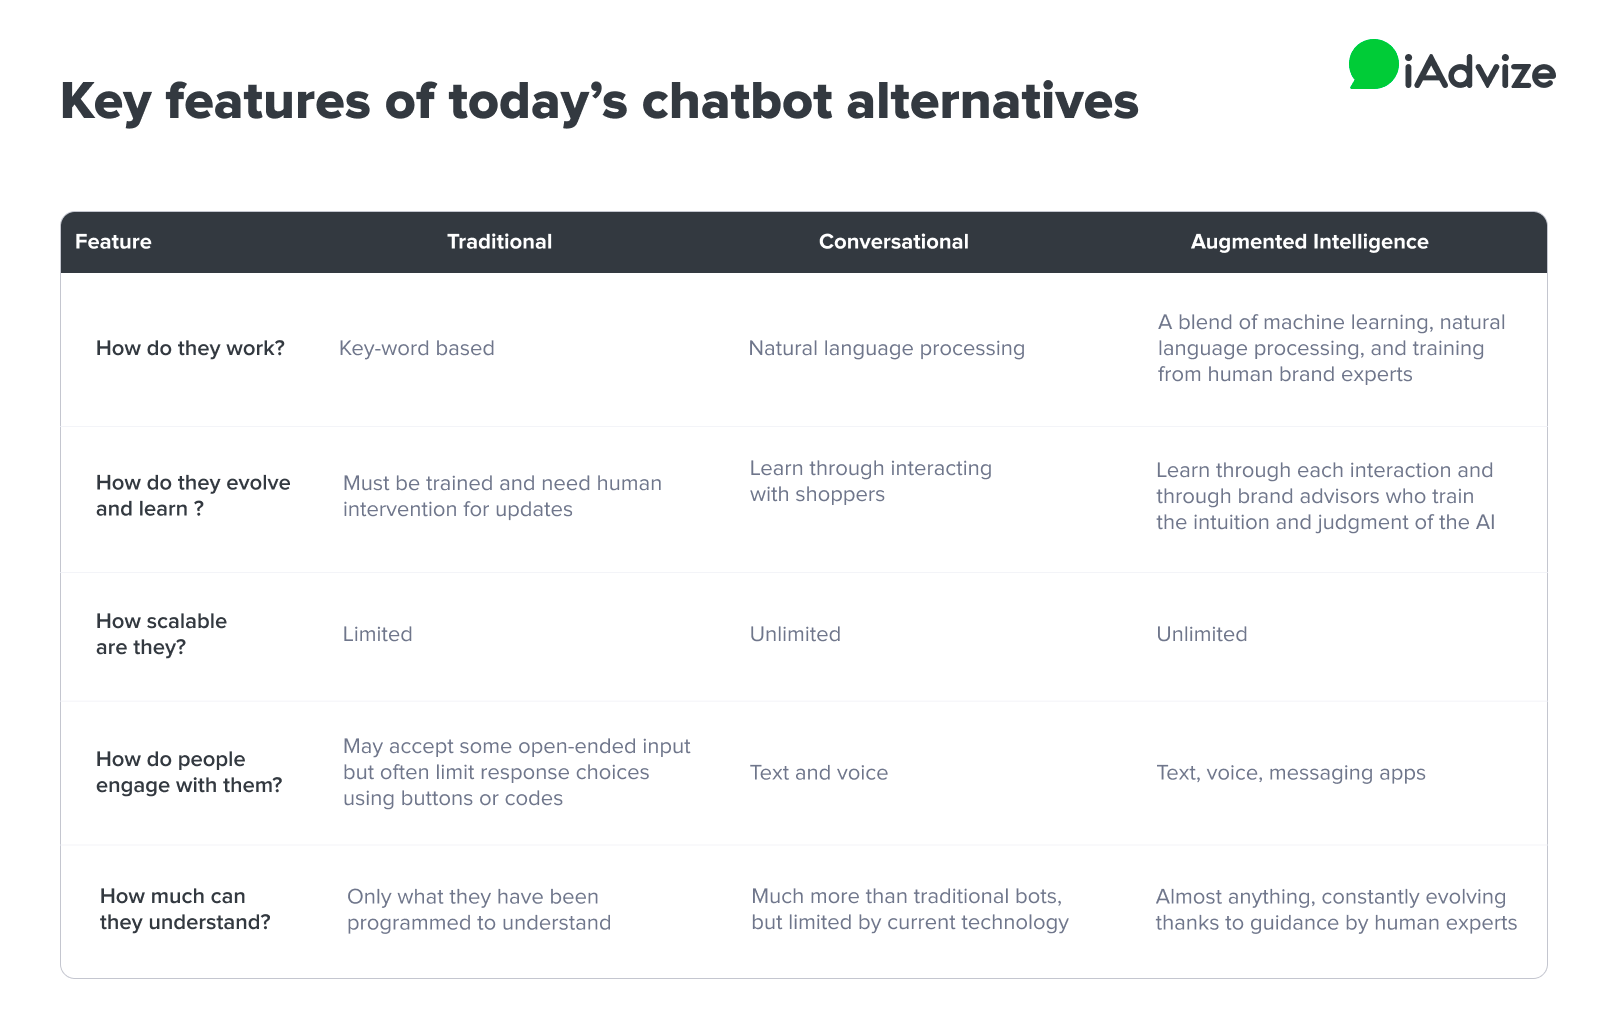 What Are Today's Chatbot Alternatives?
